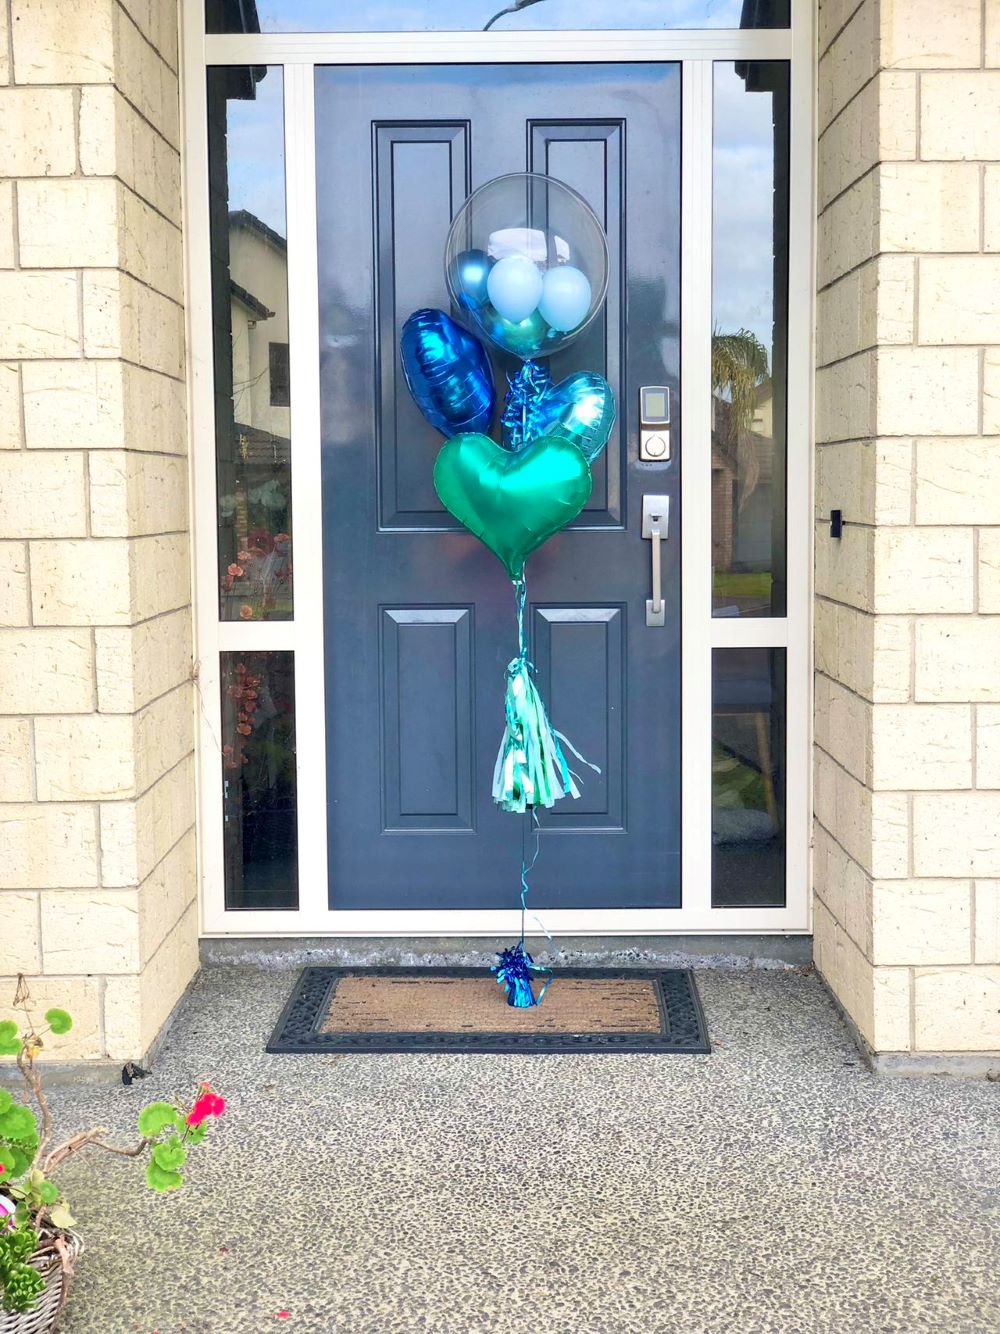 My Party Box Bubble Gum Balloon Bouquet with one bubble balloon with mini latex balloon inside and one dark blue foil heart balloon, one light blue foil heart balloon and Green Foil Heart Balloon in front of a gate